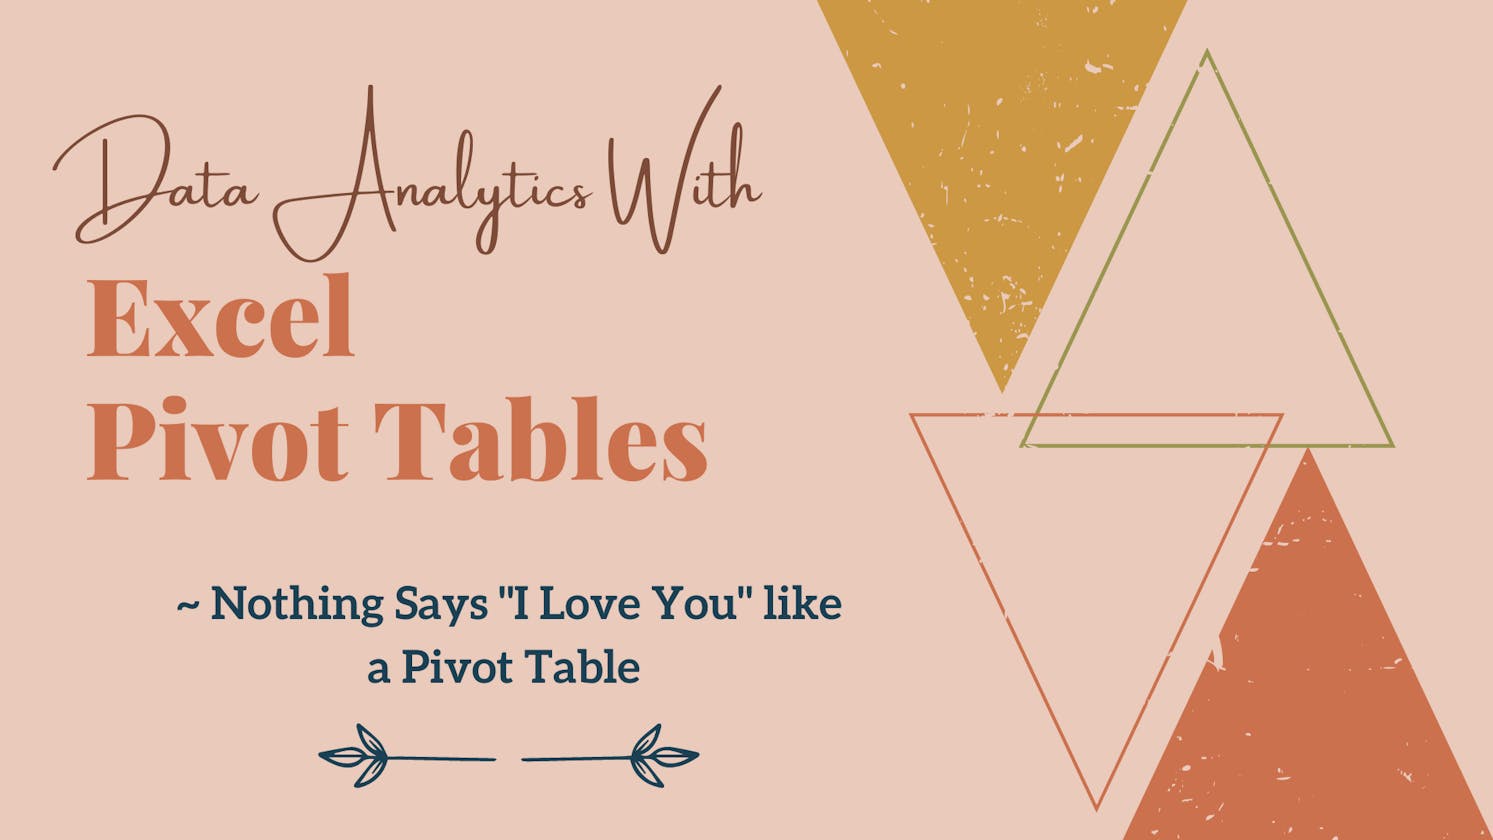 Data Analytics with Excel Pivot Tables